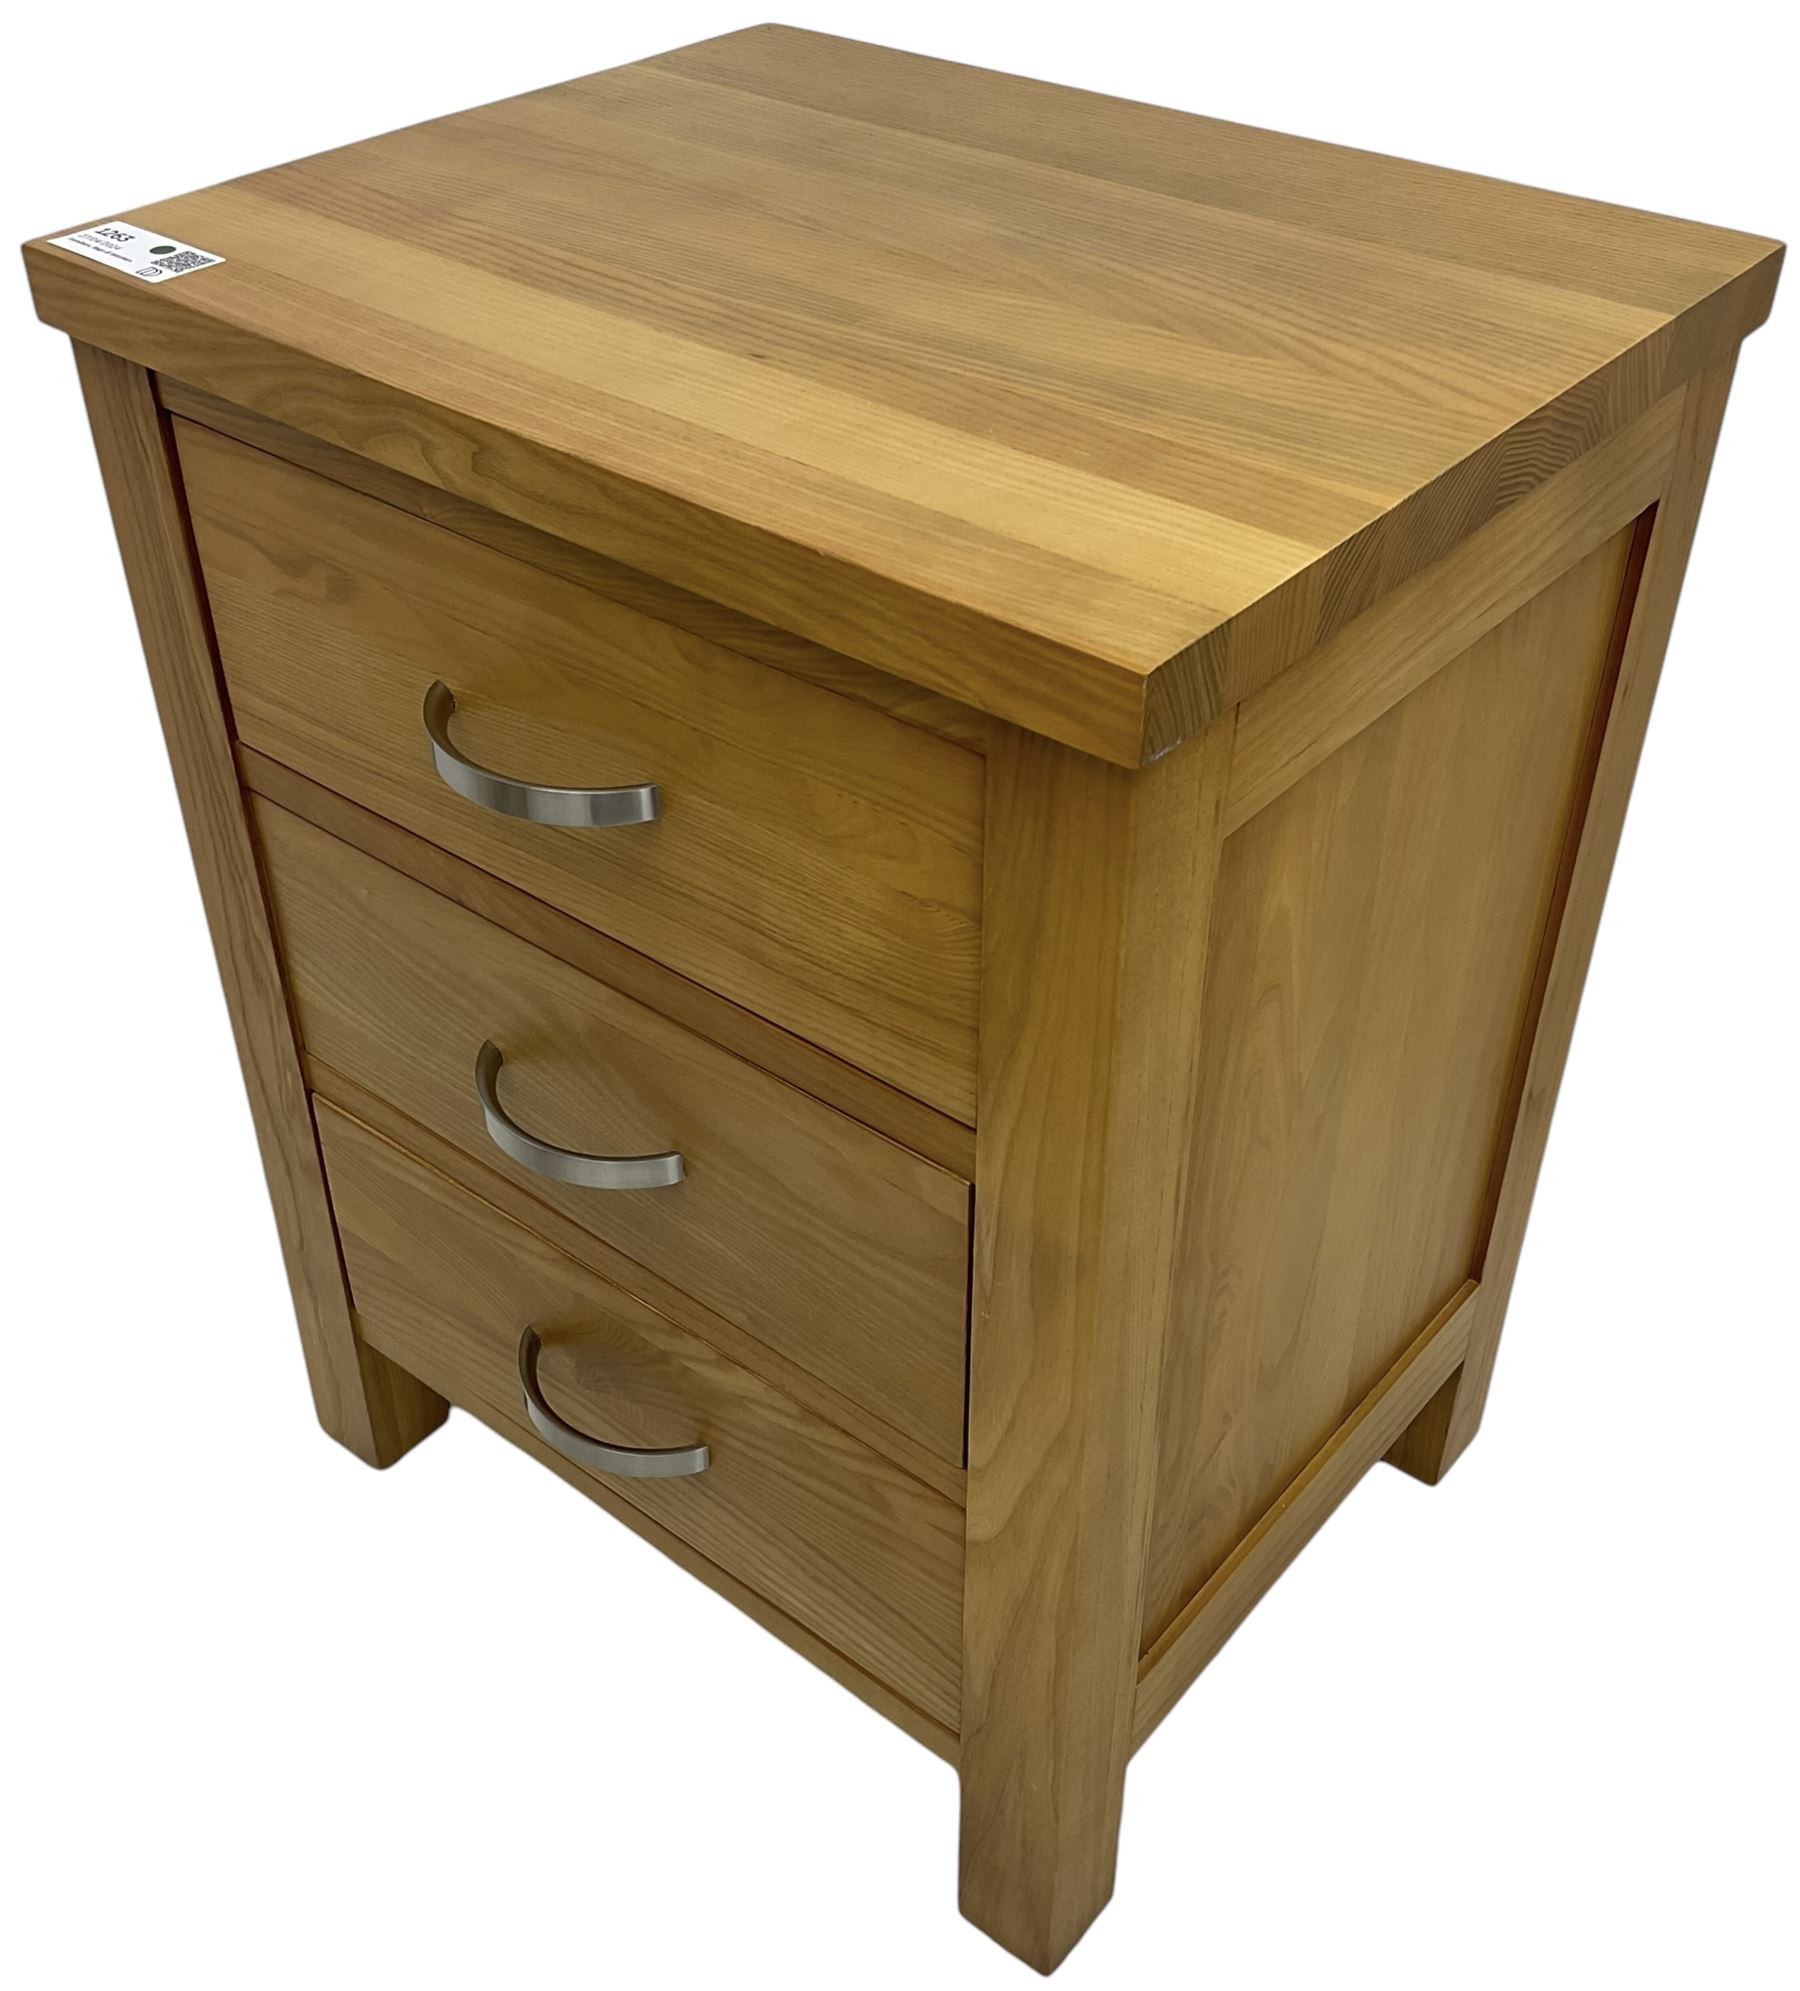 Light ash three drawer bedside chest - Image 6 of 7